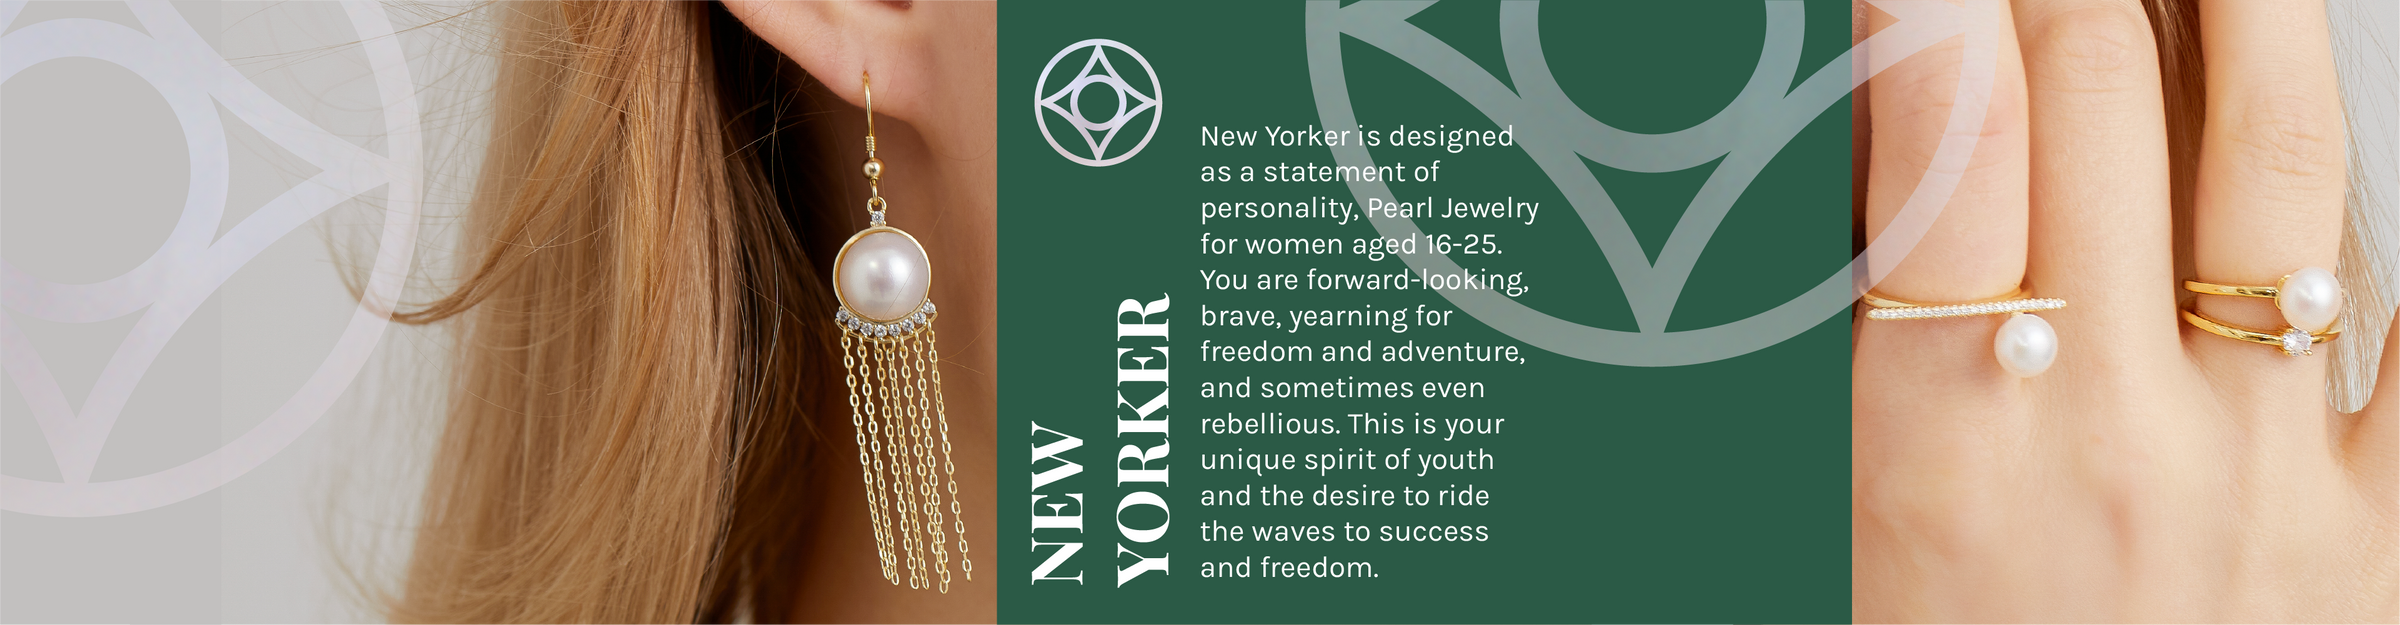 Pearly Lustre New Yorker Collection